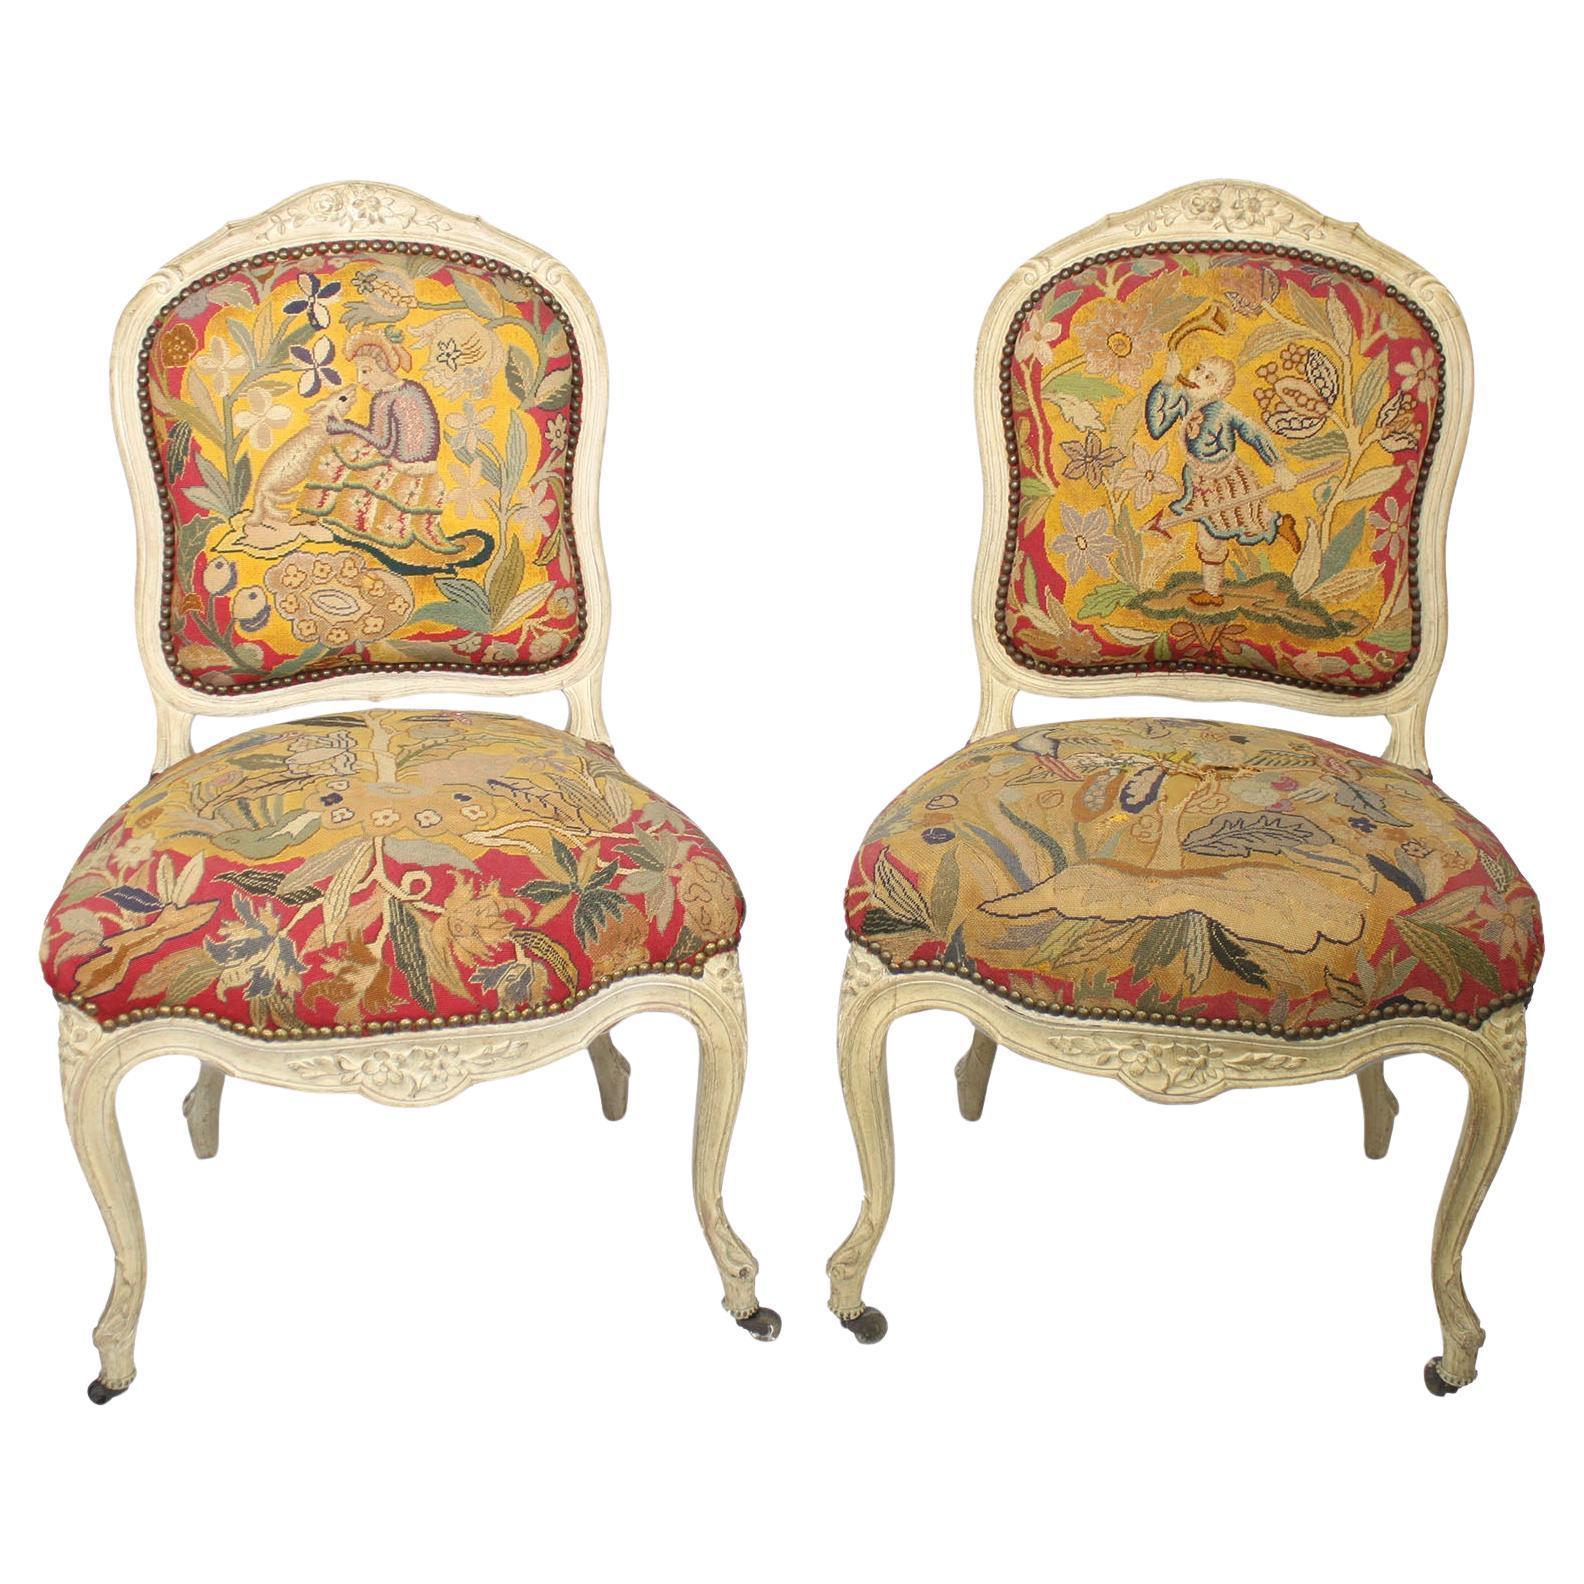 Pair of French 19th Century Louis XV Style White-Lacquer Needlepoint Side Chairs